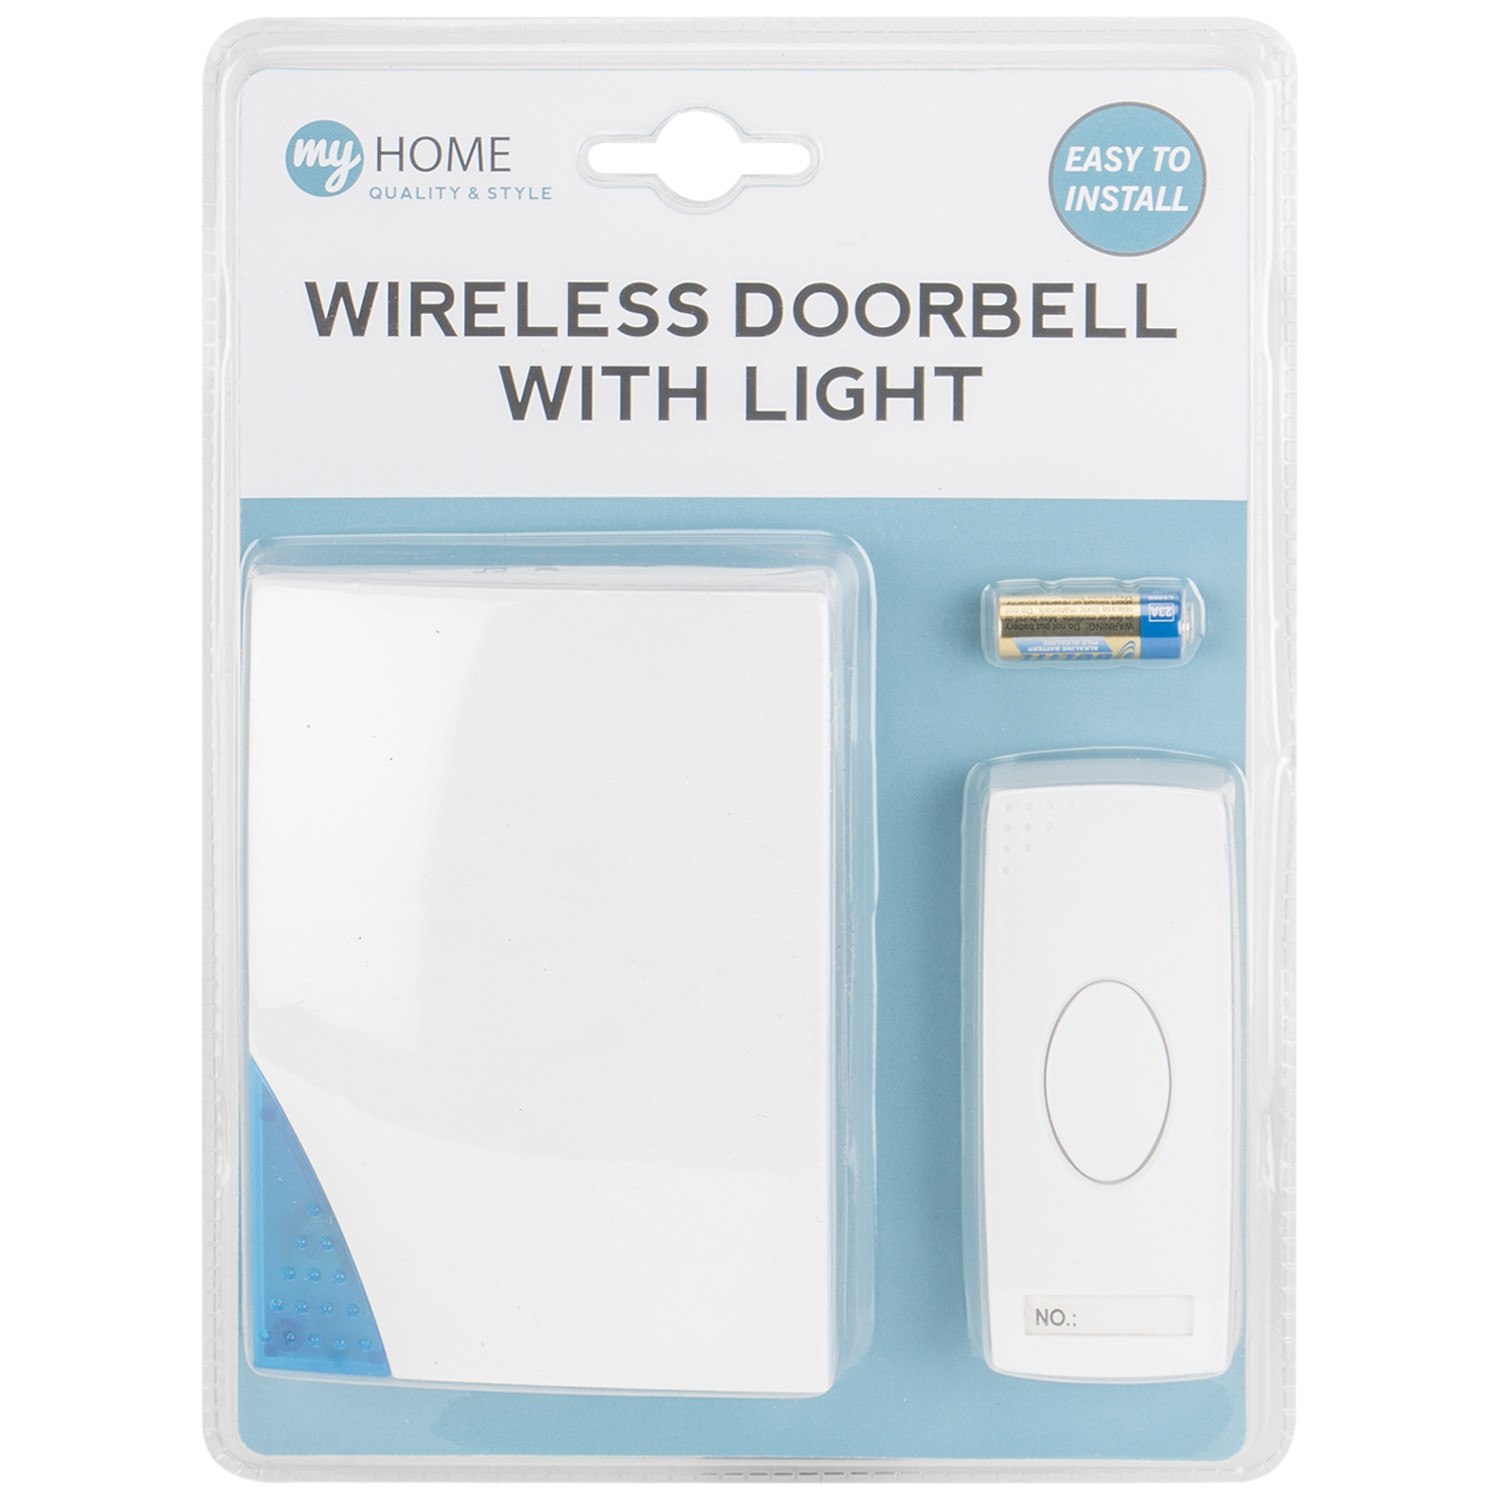 My Home Wireless Doorbell with Light Image